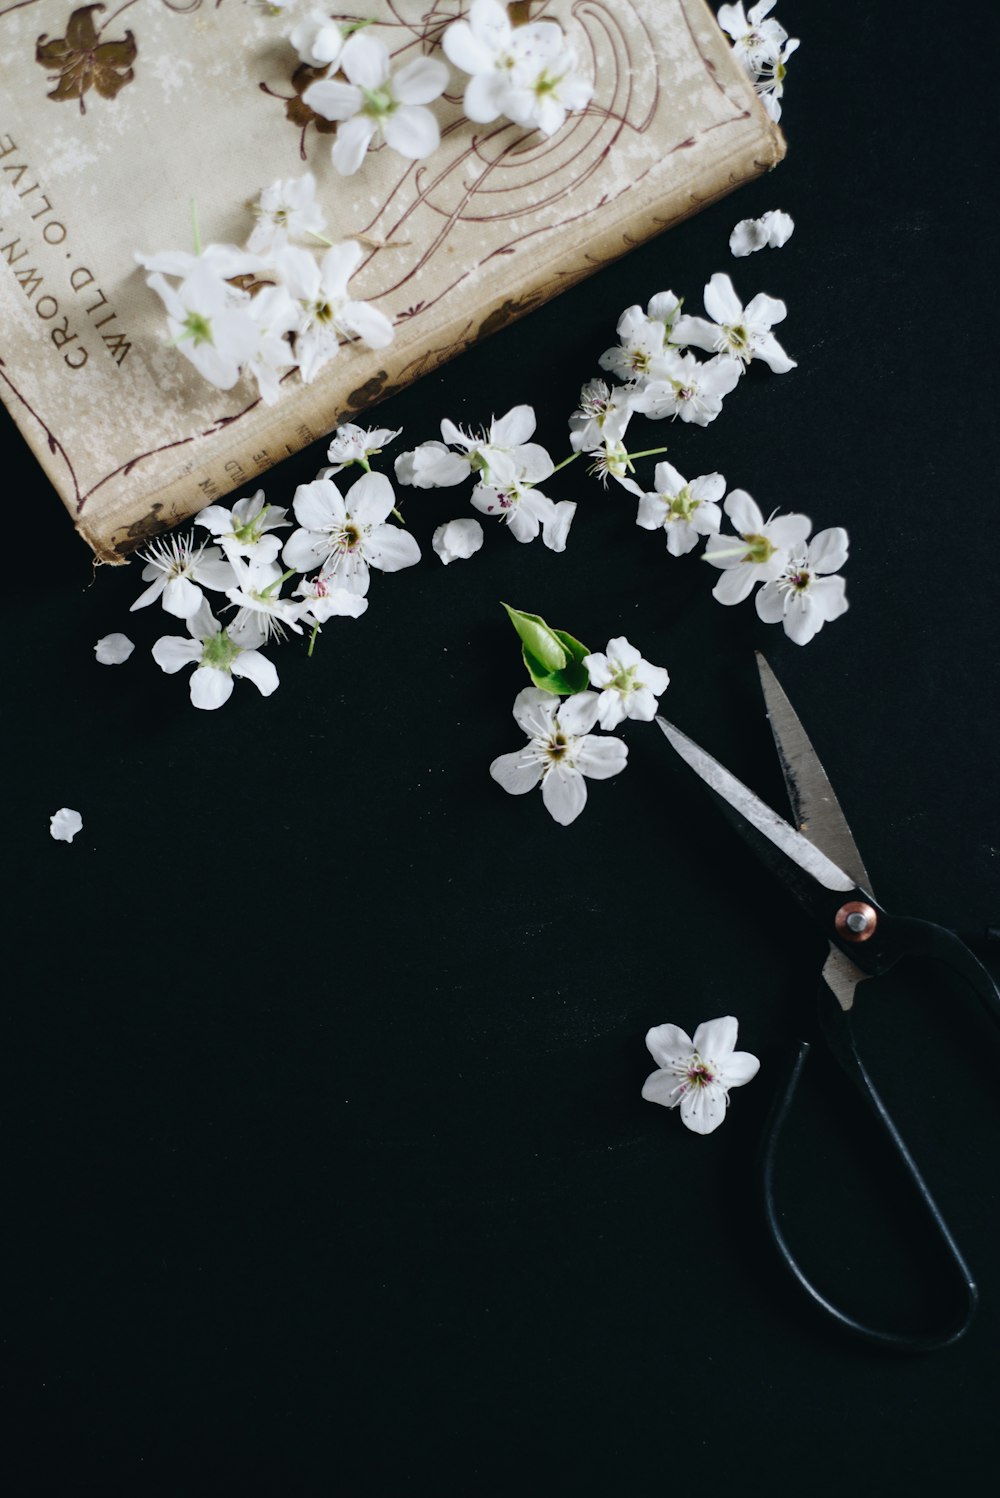 white flowers, book, and scissors on table